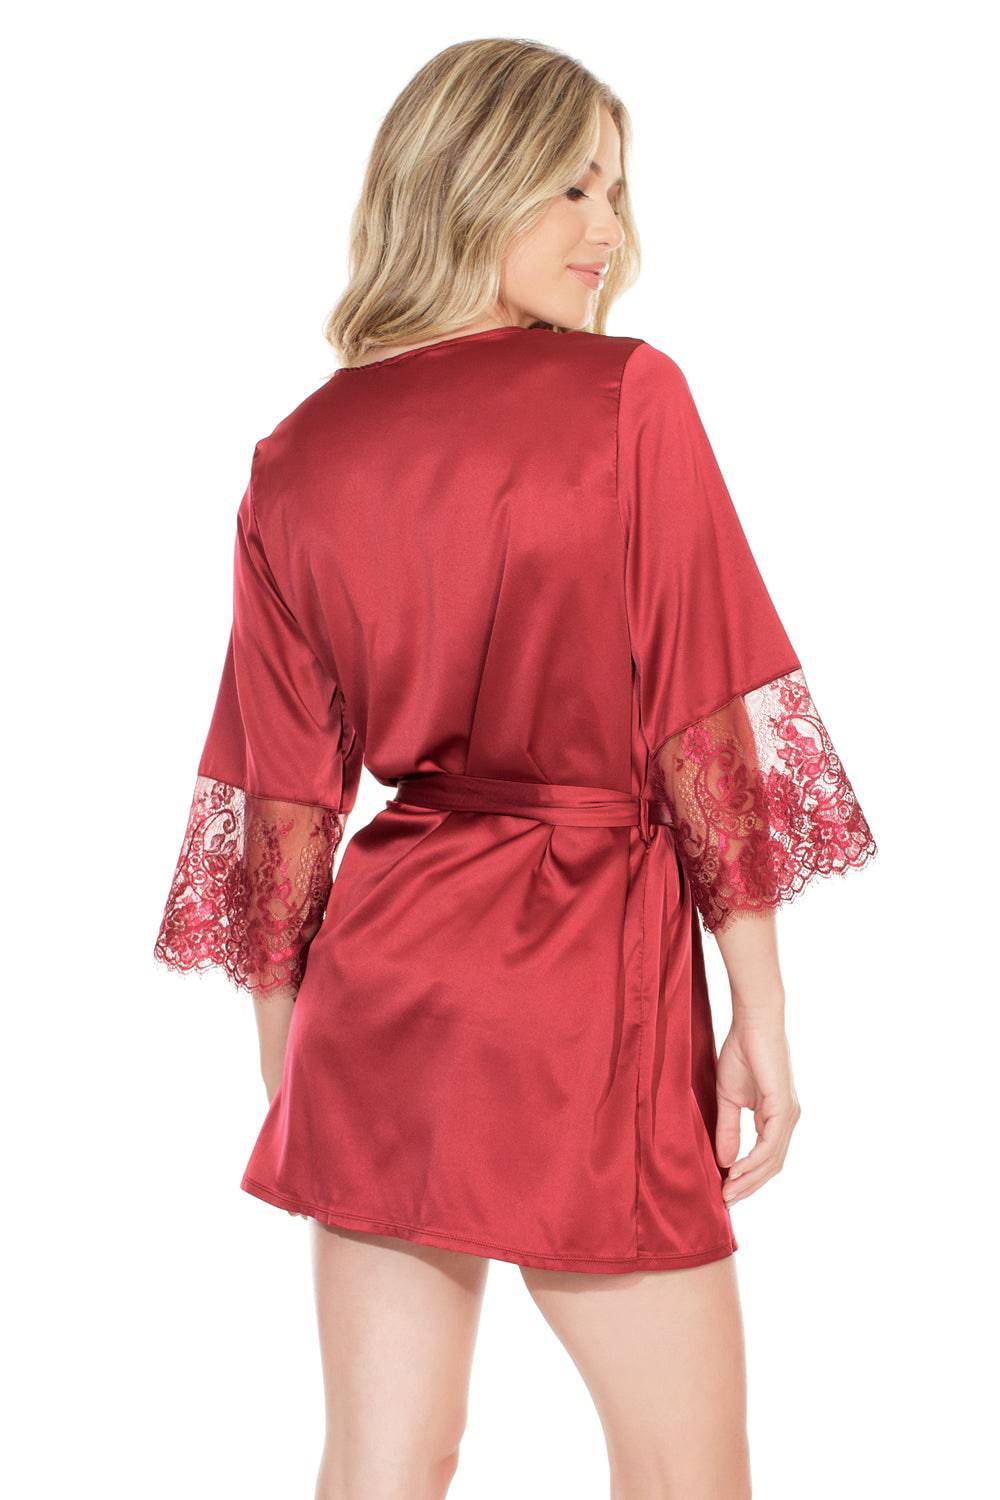 Coquette - 7224 - Satin Robe with Lace Finish - Merlot - OS - Stag Shop